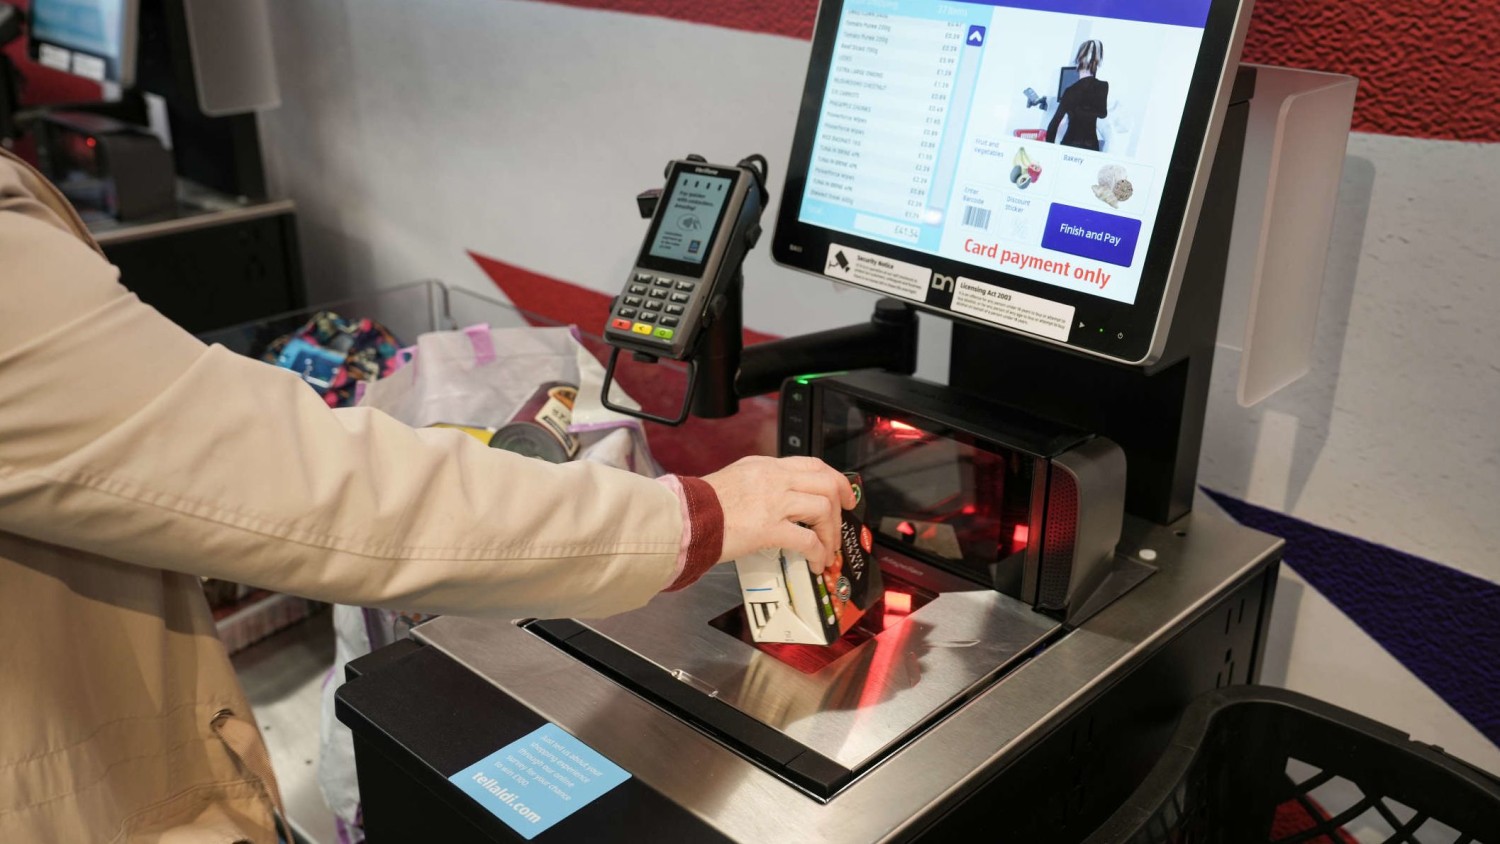 Some stores are removing self-checkout stations. Hear why